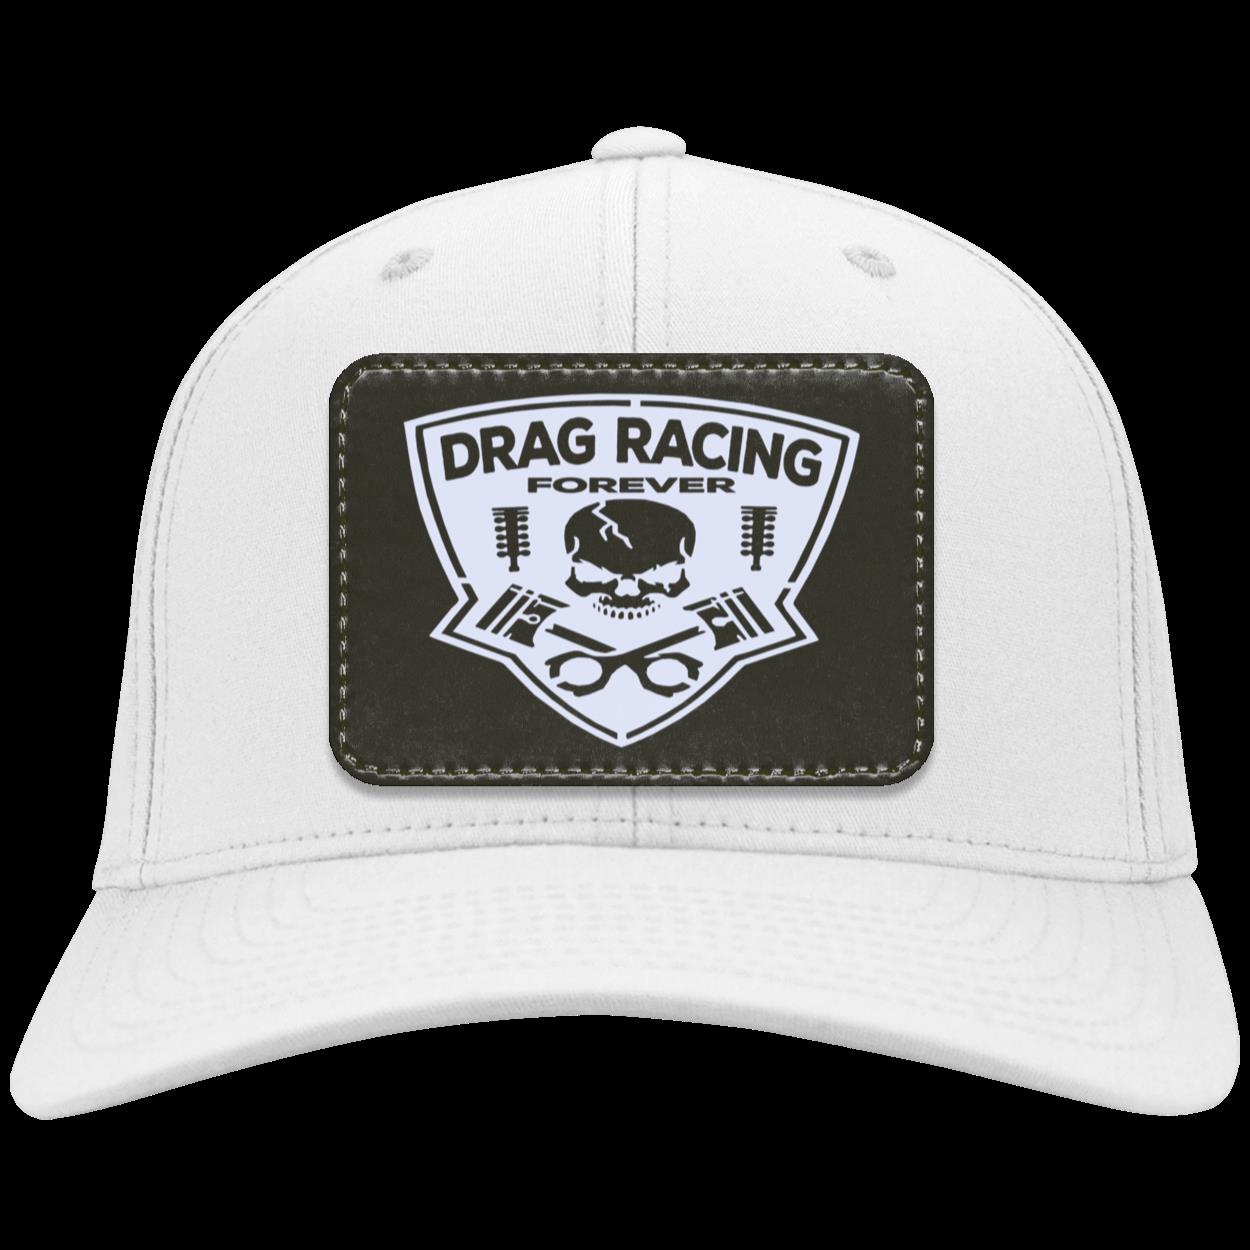 Drag Racing Forever Patched Twill Cap